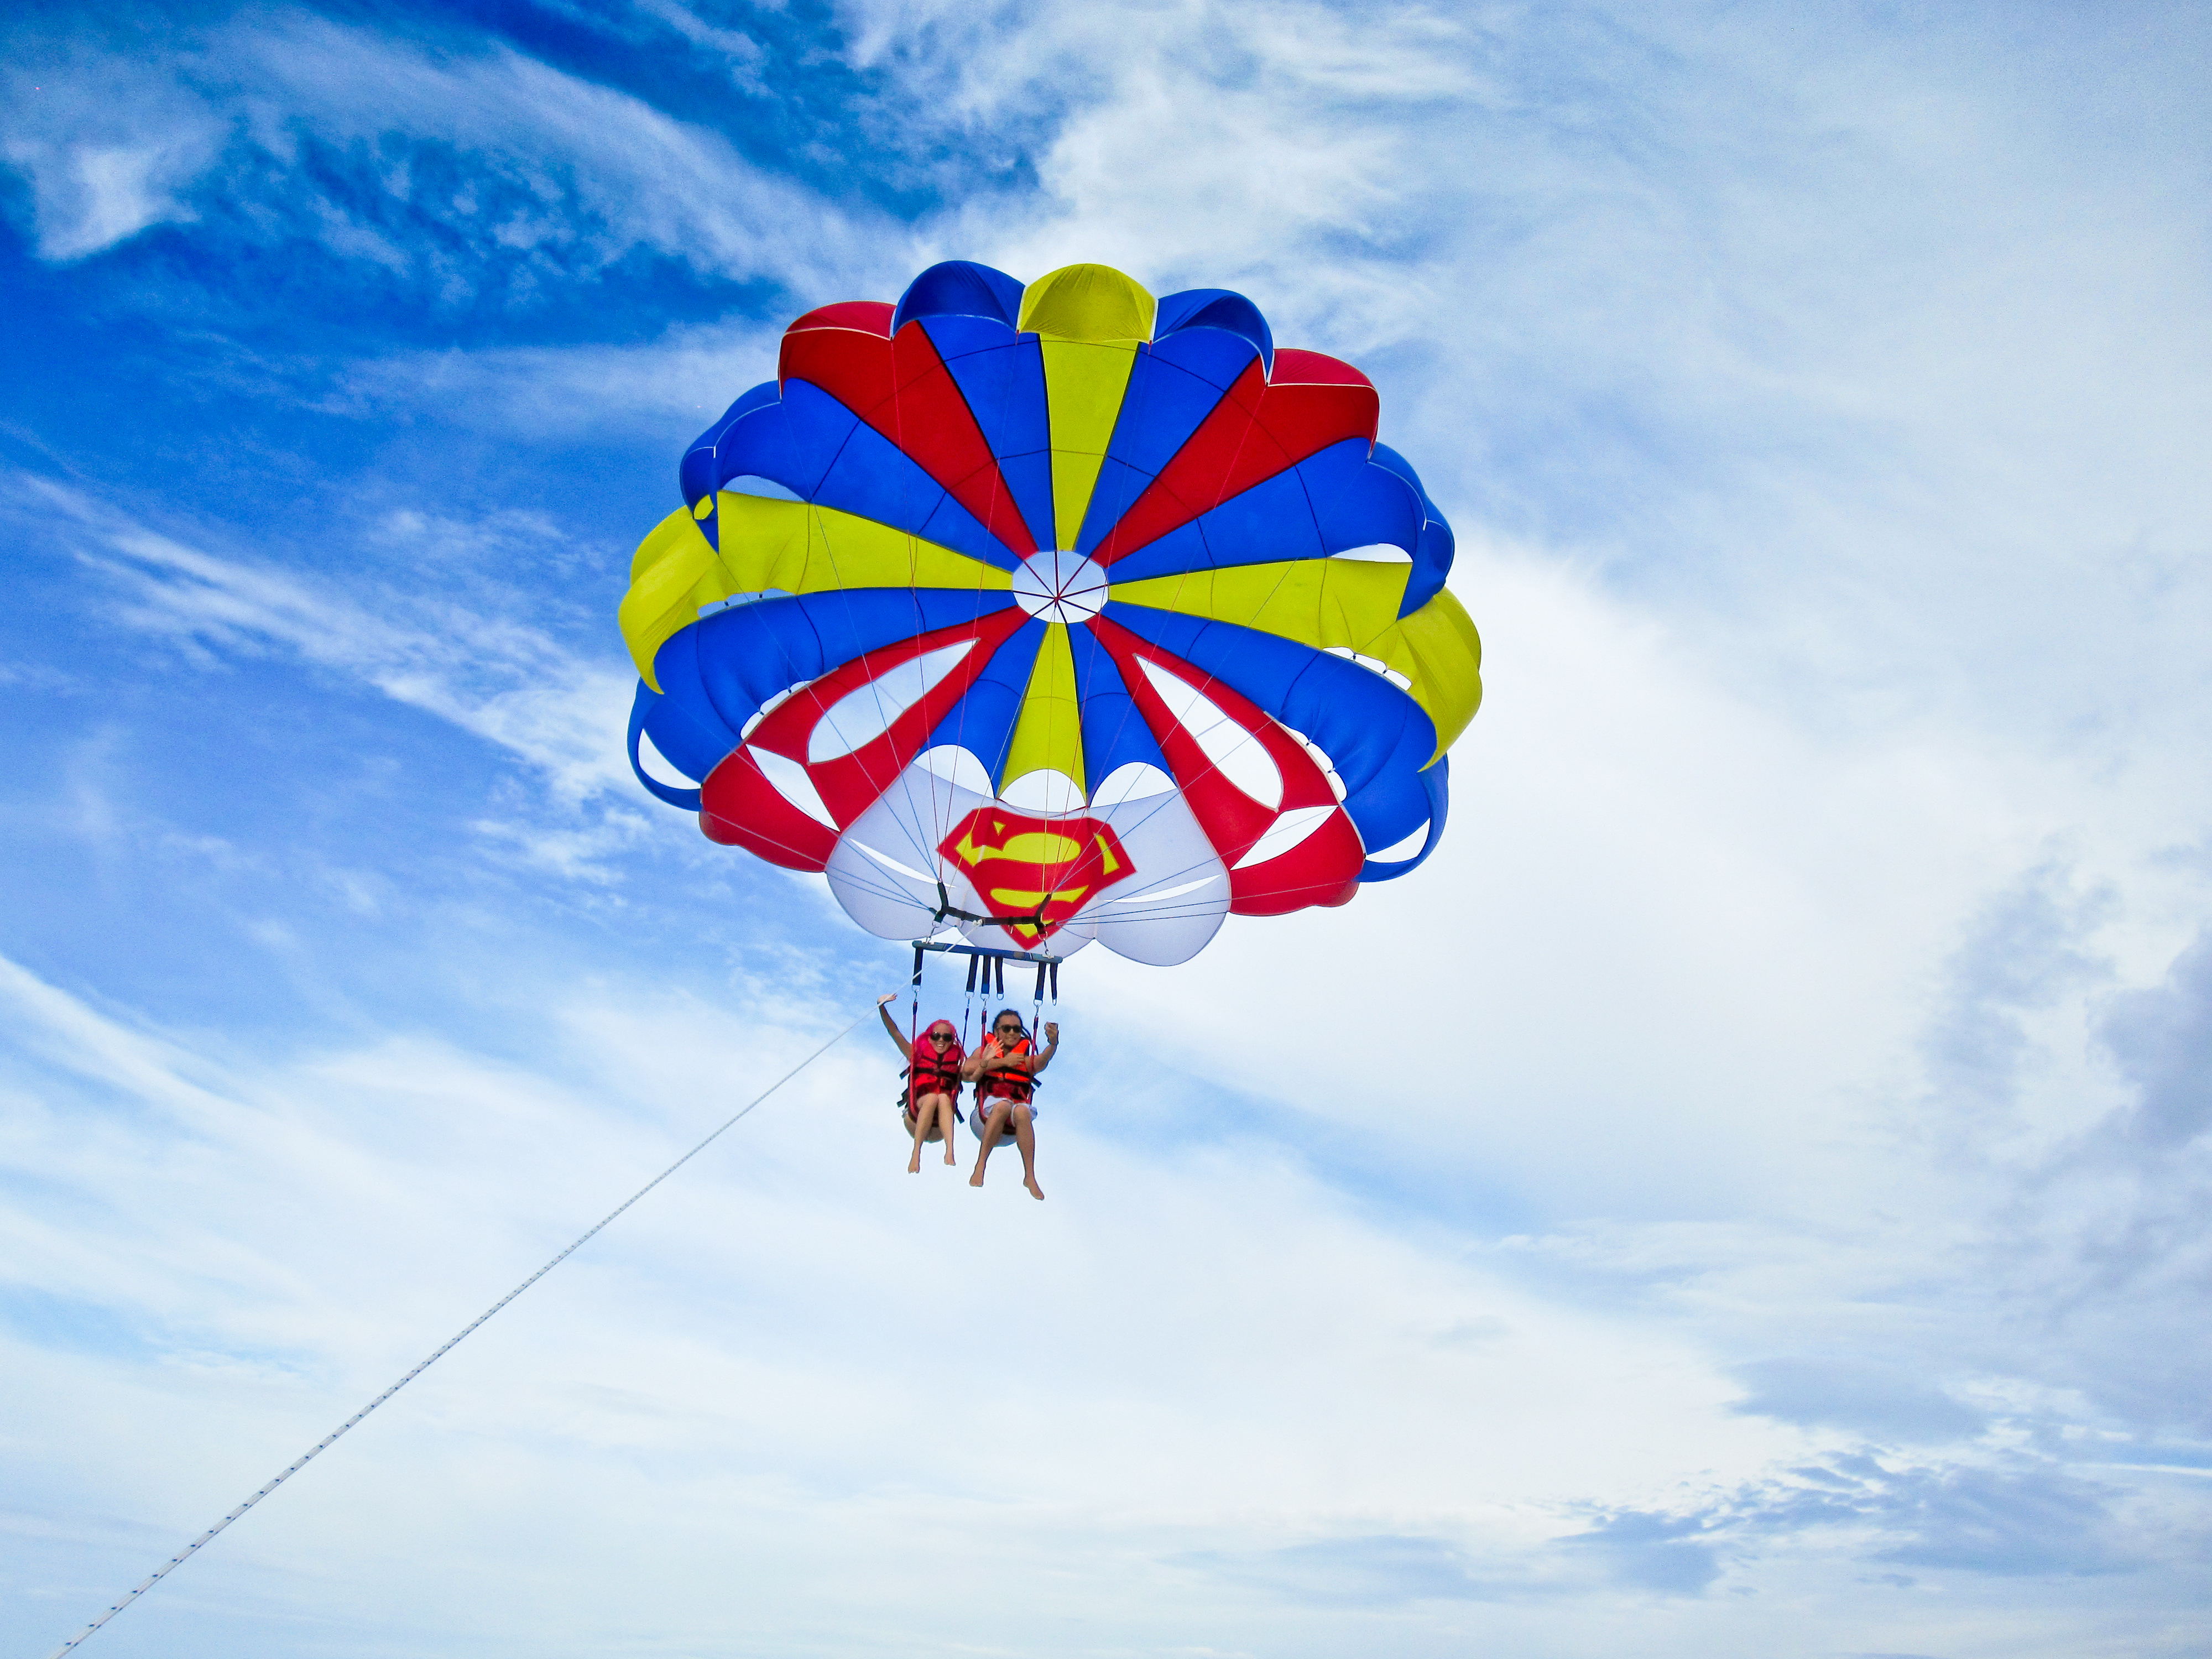 Happiness is a Piece of Cake: Parasailing in Boracay, Philippines